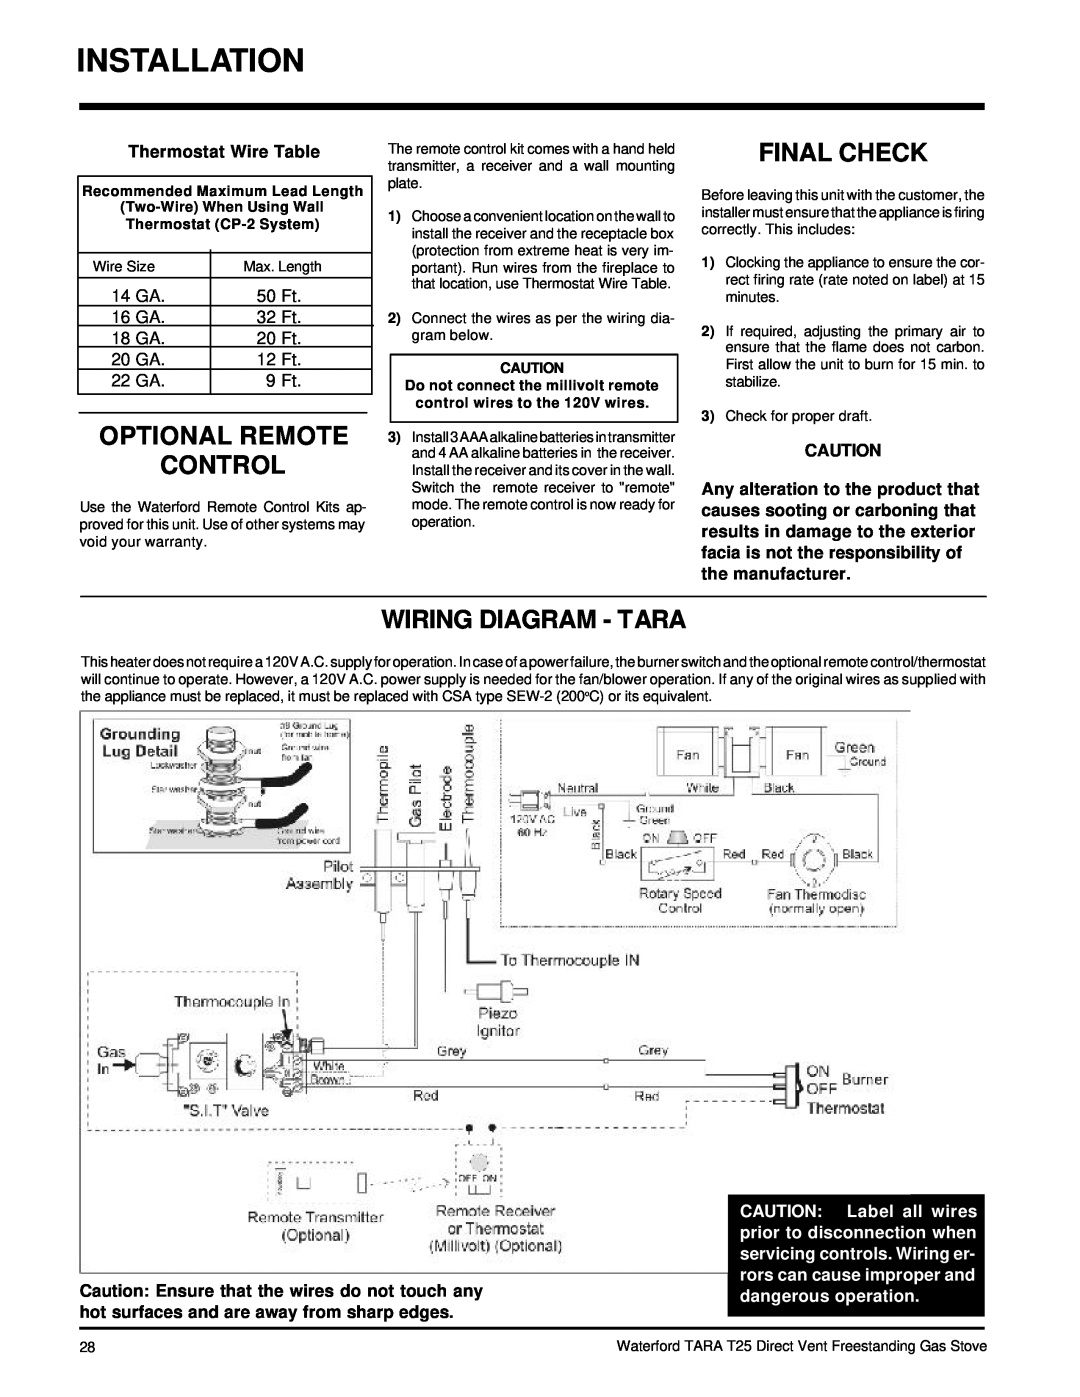 Waterford Appliances T25-NG, T25-LP Optional Remote Control, Final Check, Wiring Diagram - Tara, Thermostat Wire Table 